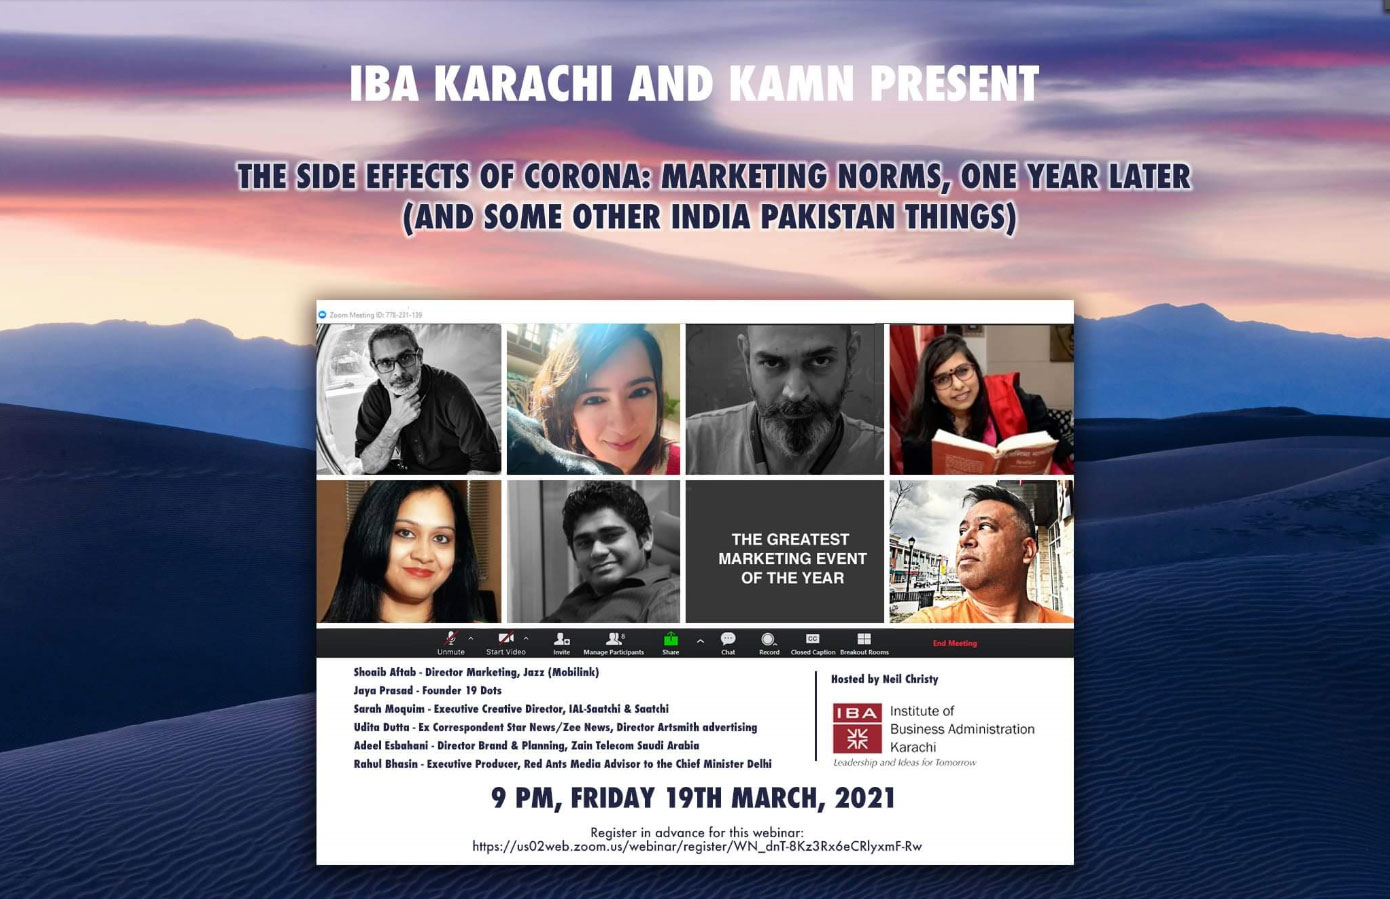 Department of Marketing to organize panel discussion in collaboration with KAMN